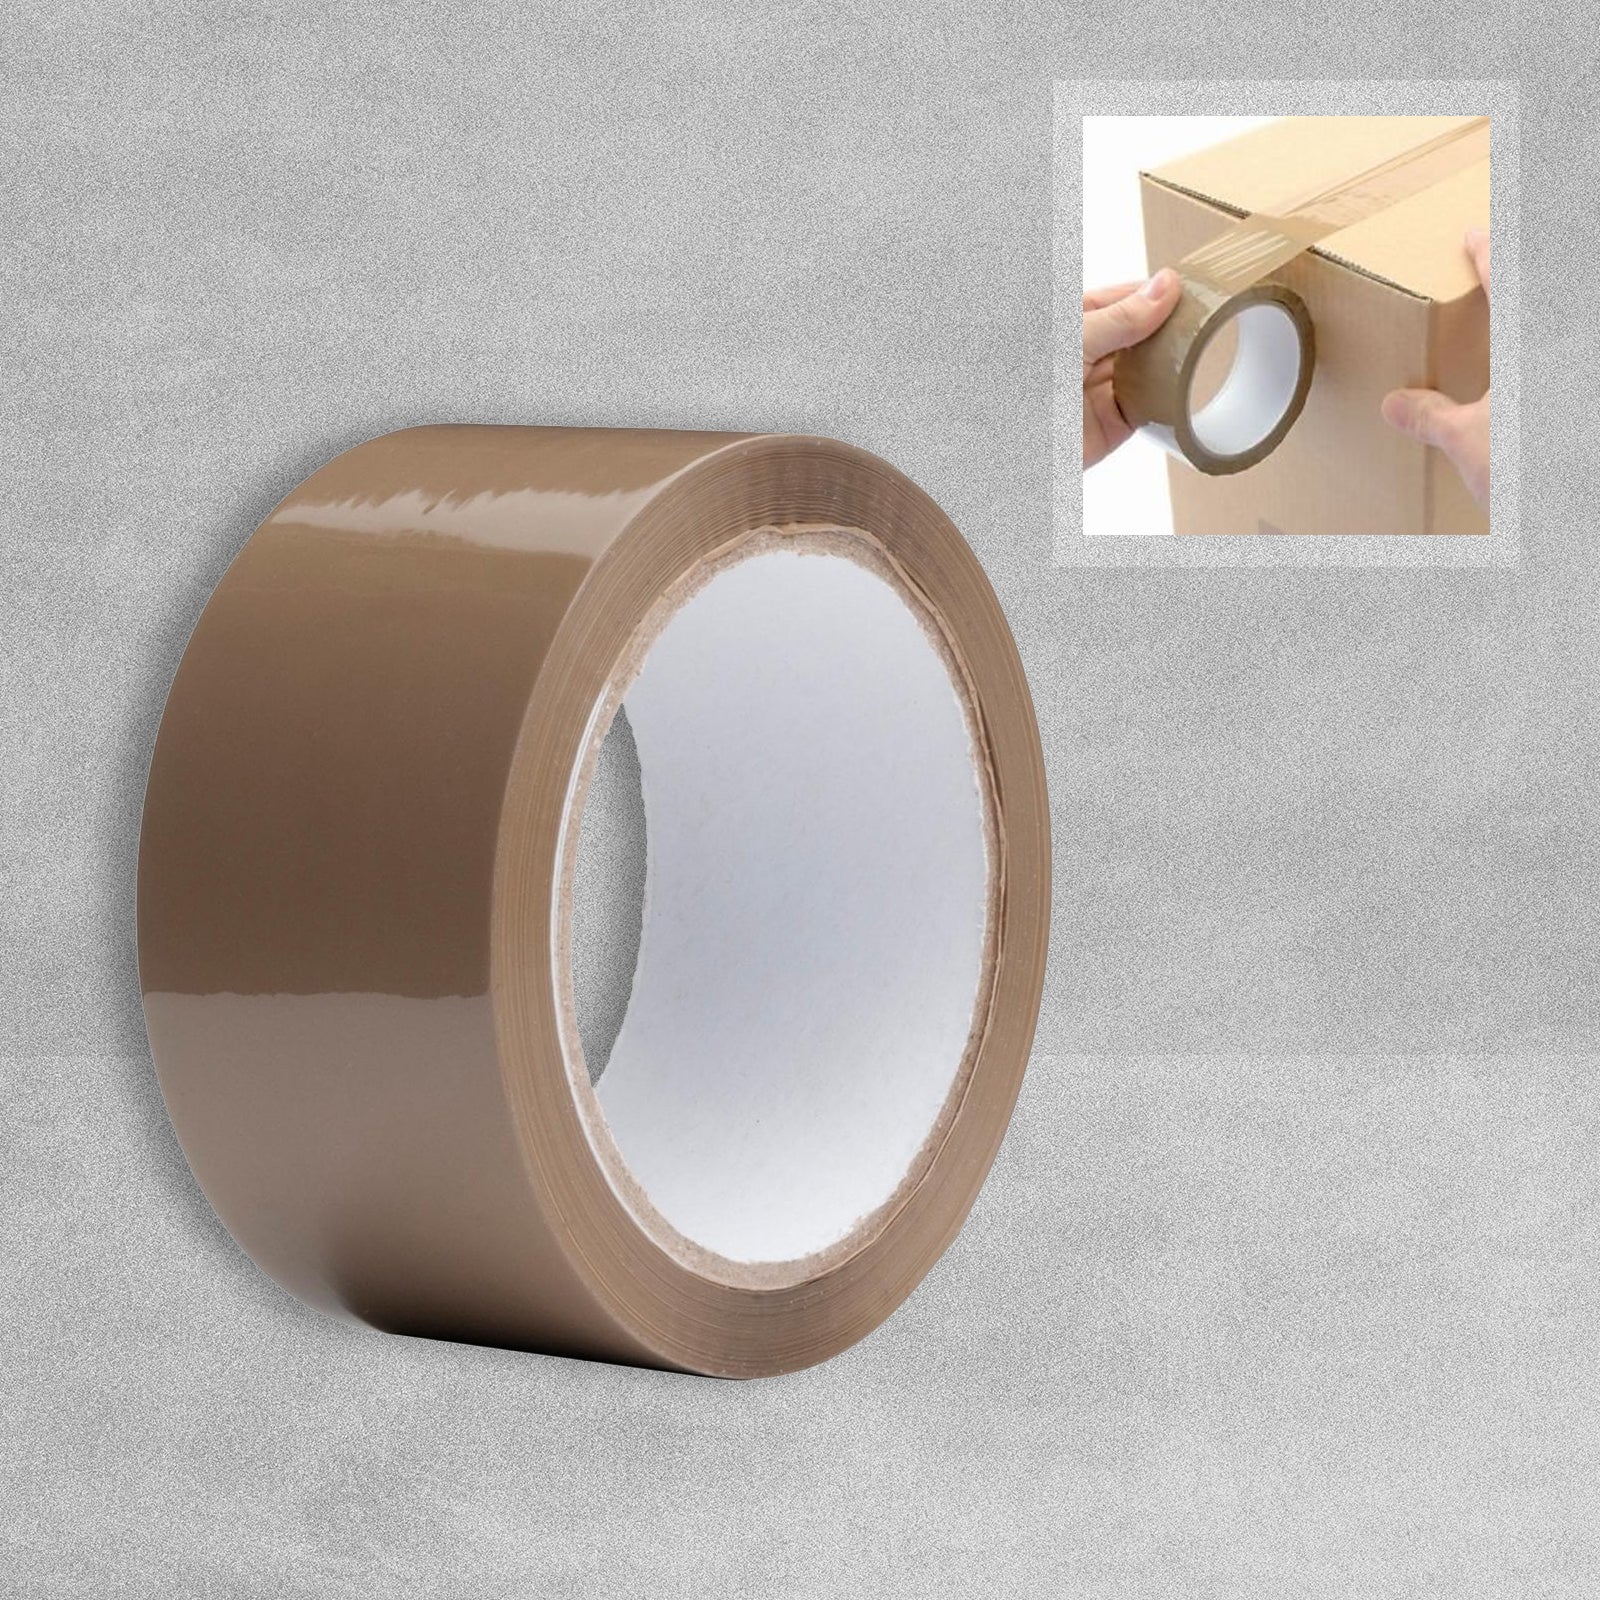 Brown Packing Sticky Tape 48mm x 66m - 1 Roll